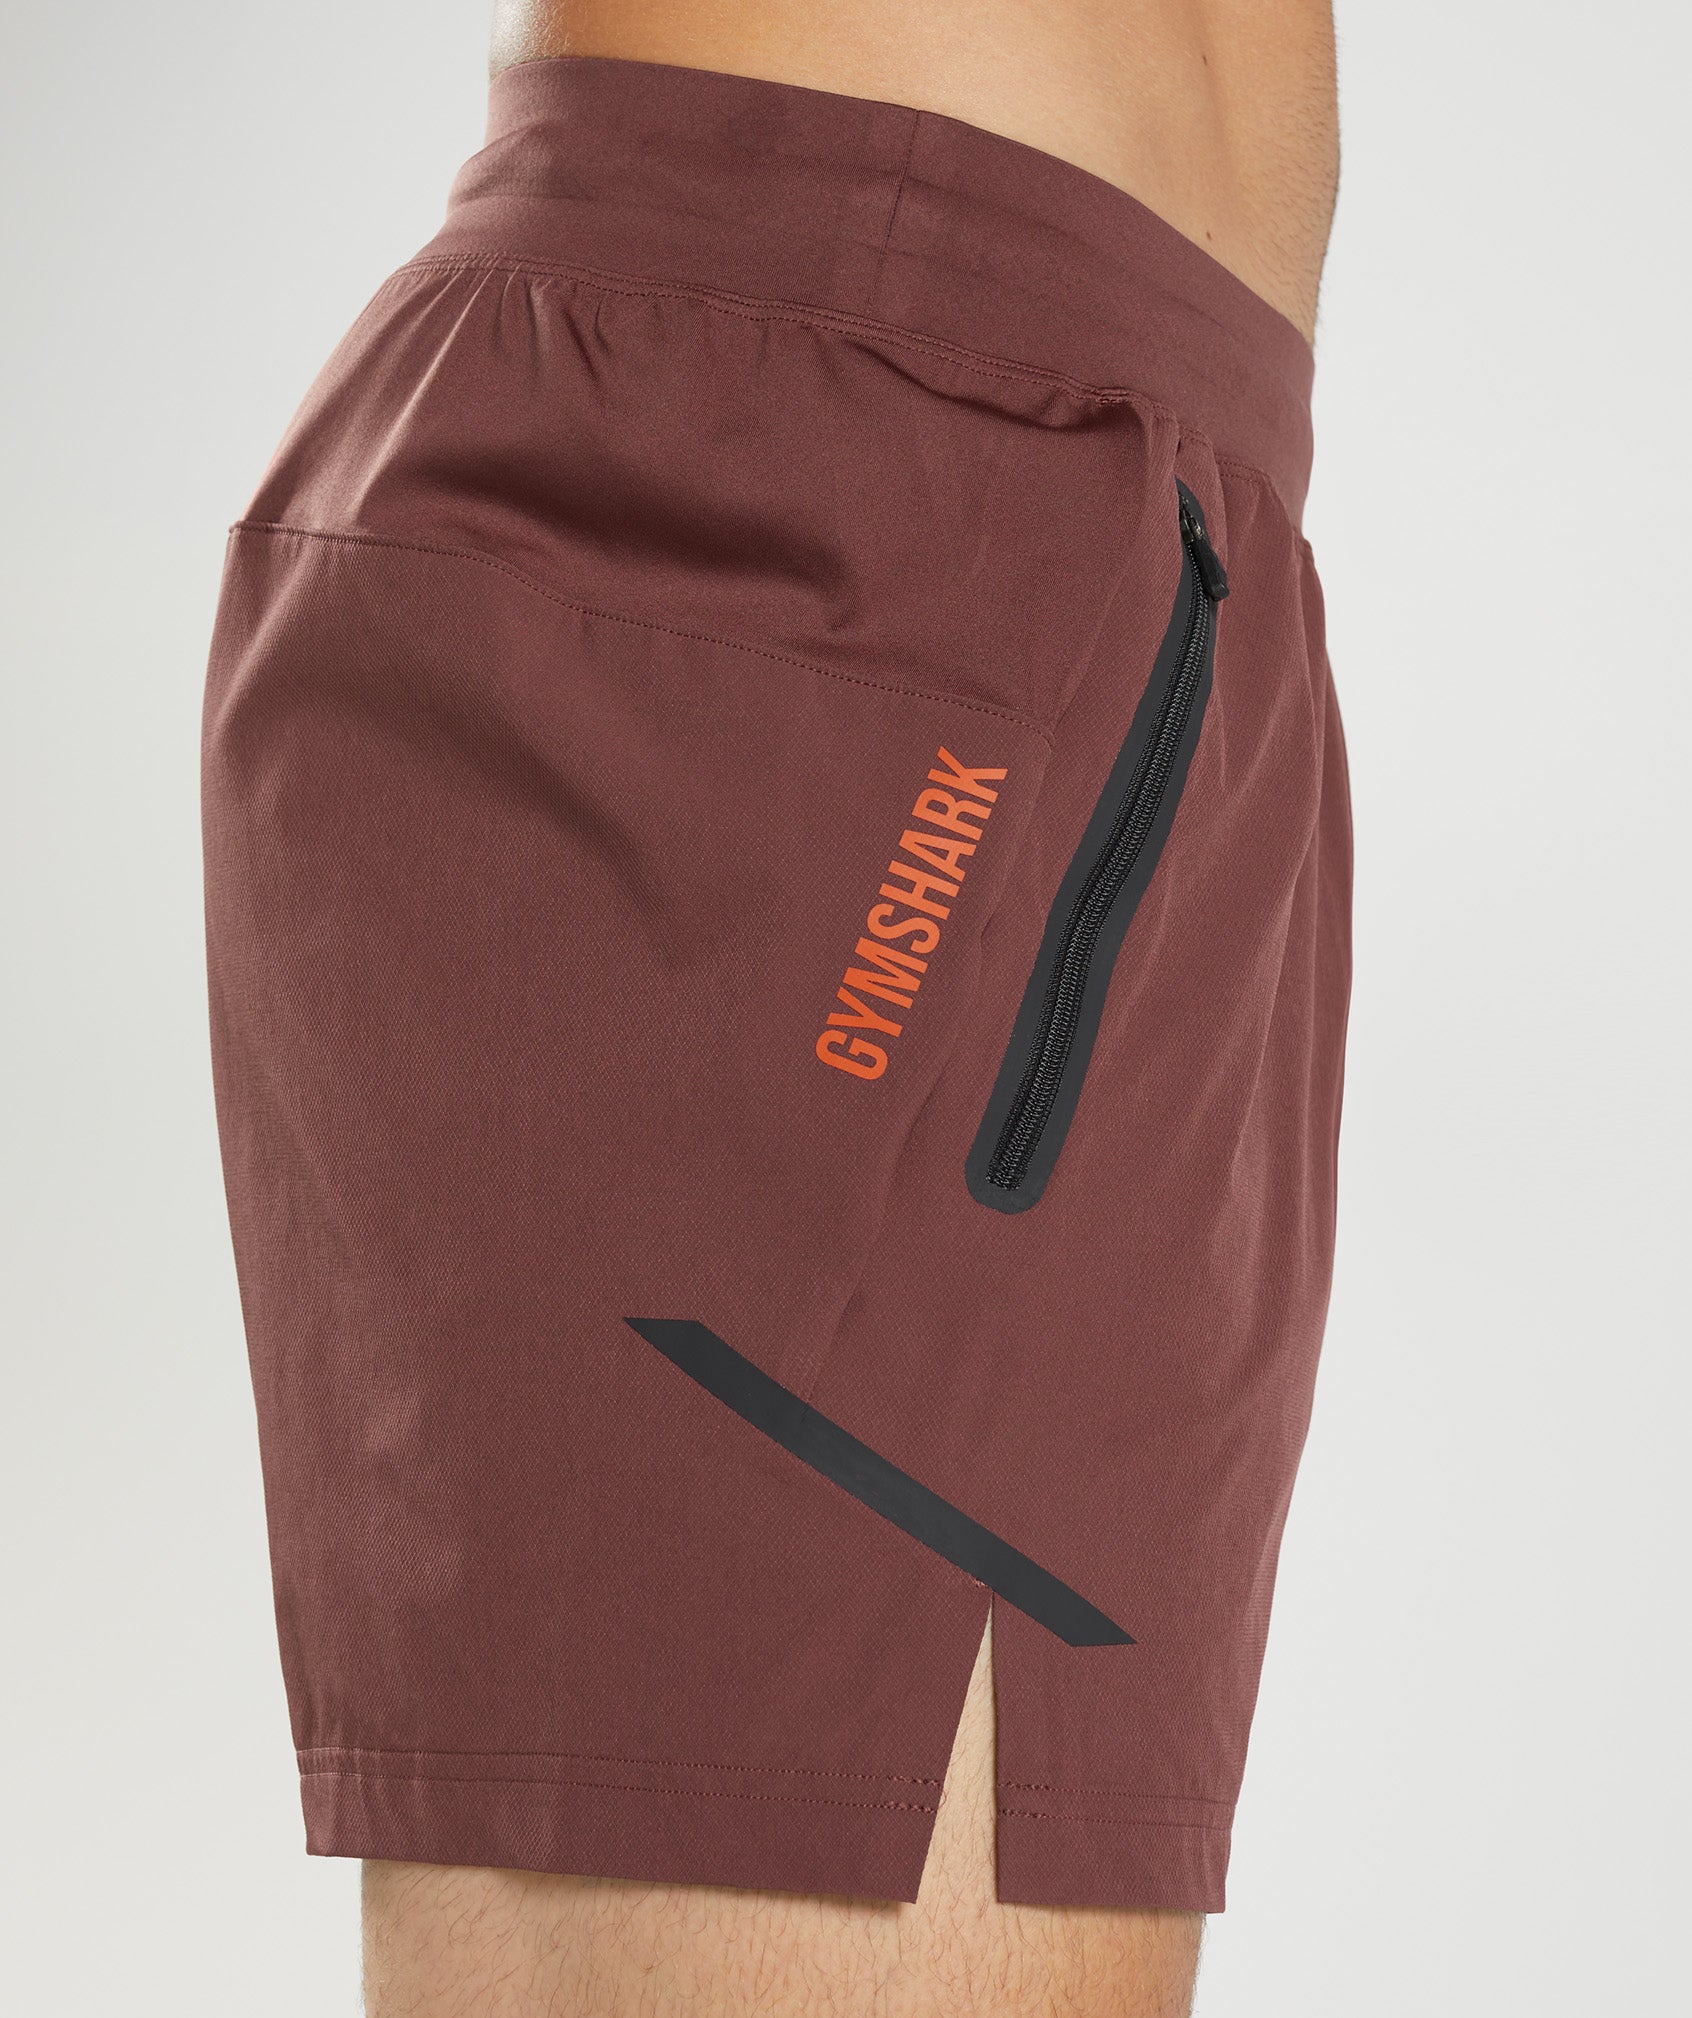 Apex 5" Perform Shorts in Cherry Brown